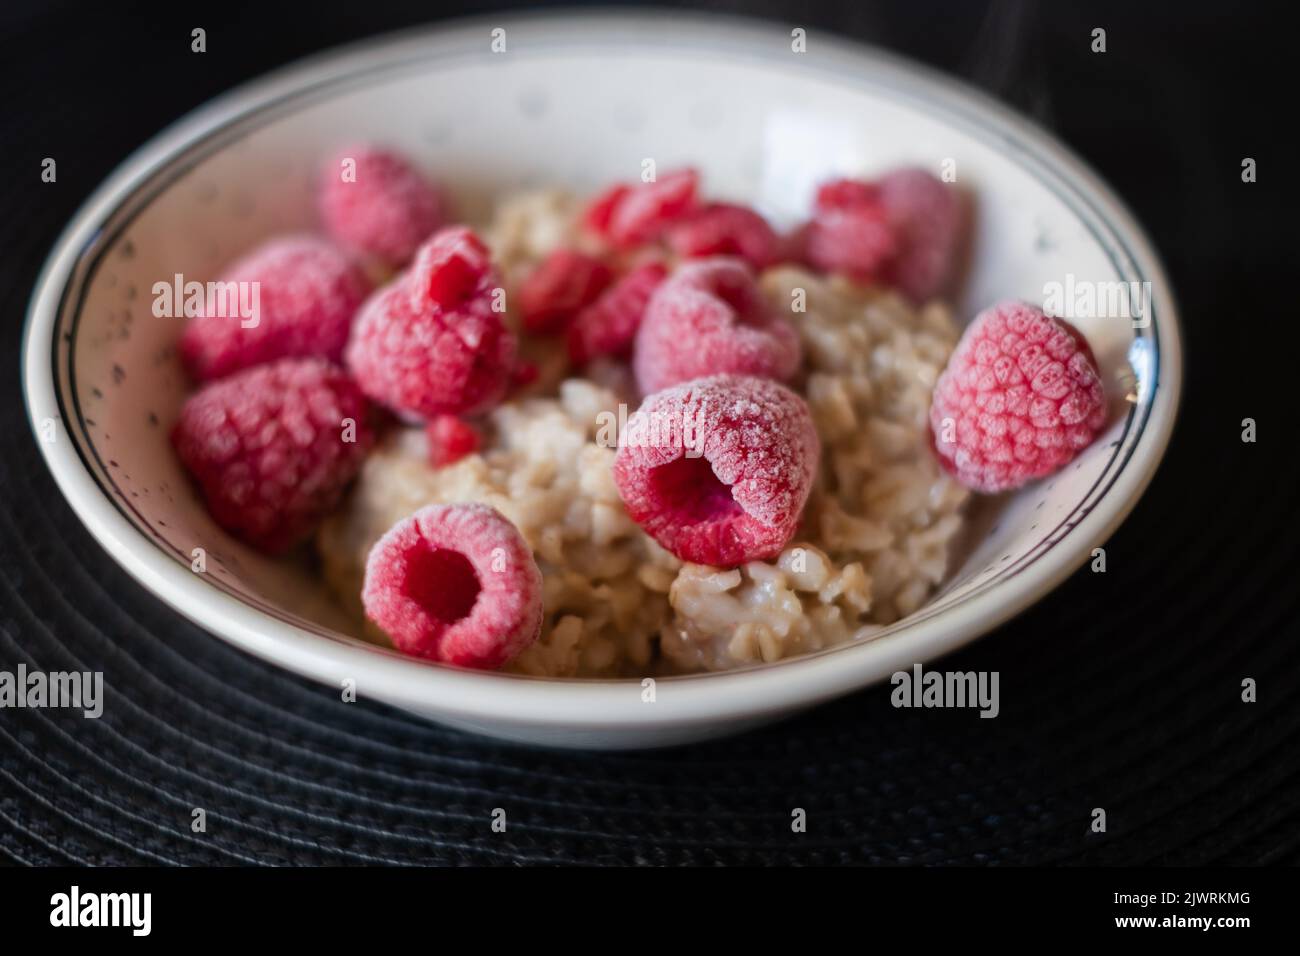 Hot oatmeal porridge with cold frozen berries steaming. Kids menu. Stock Photo